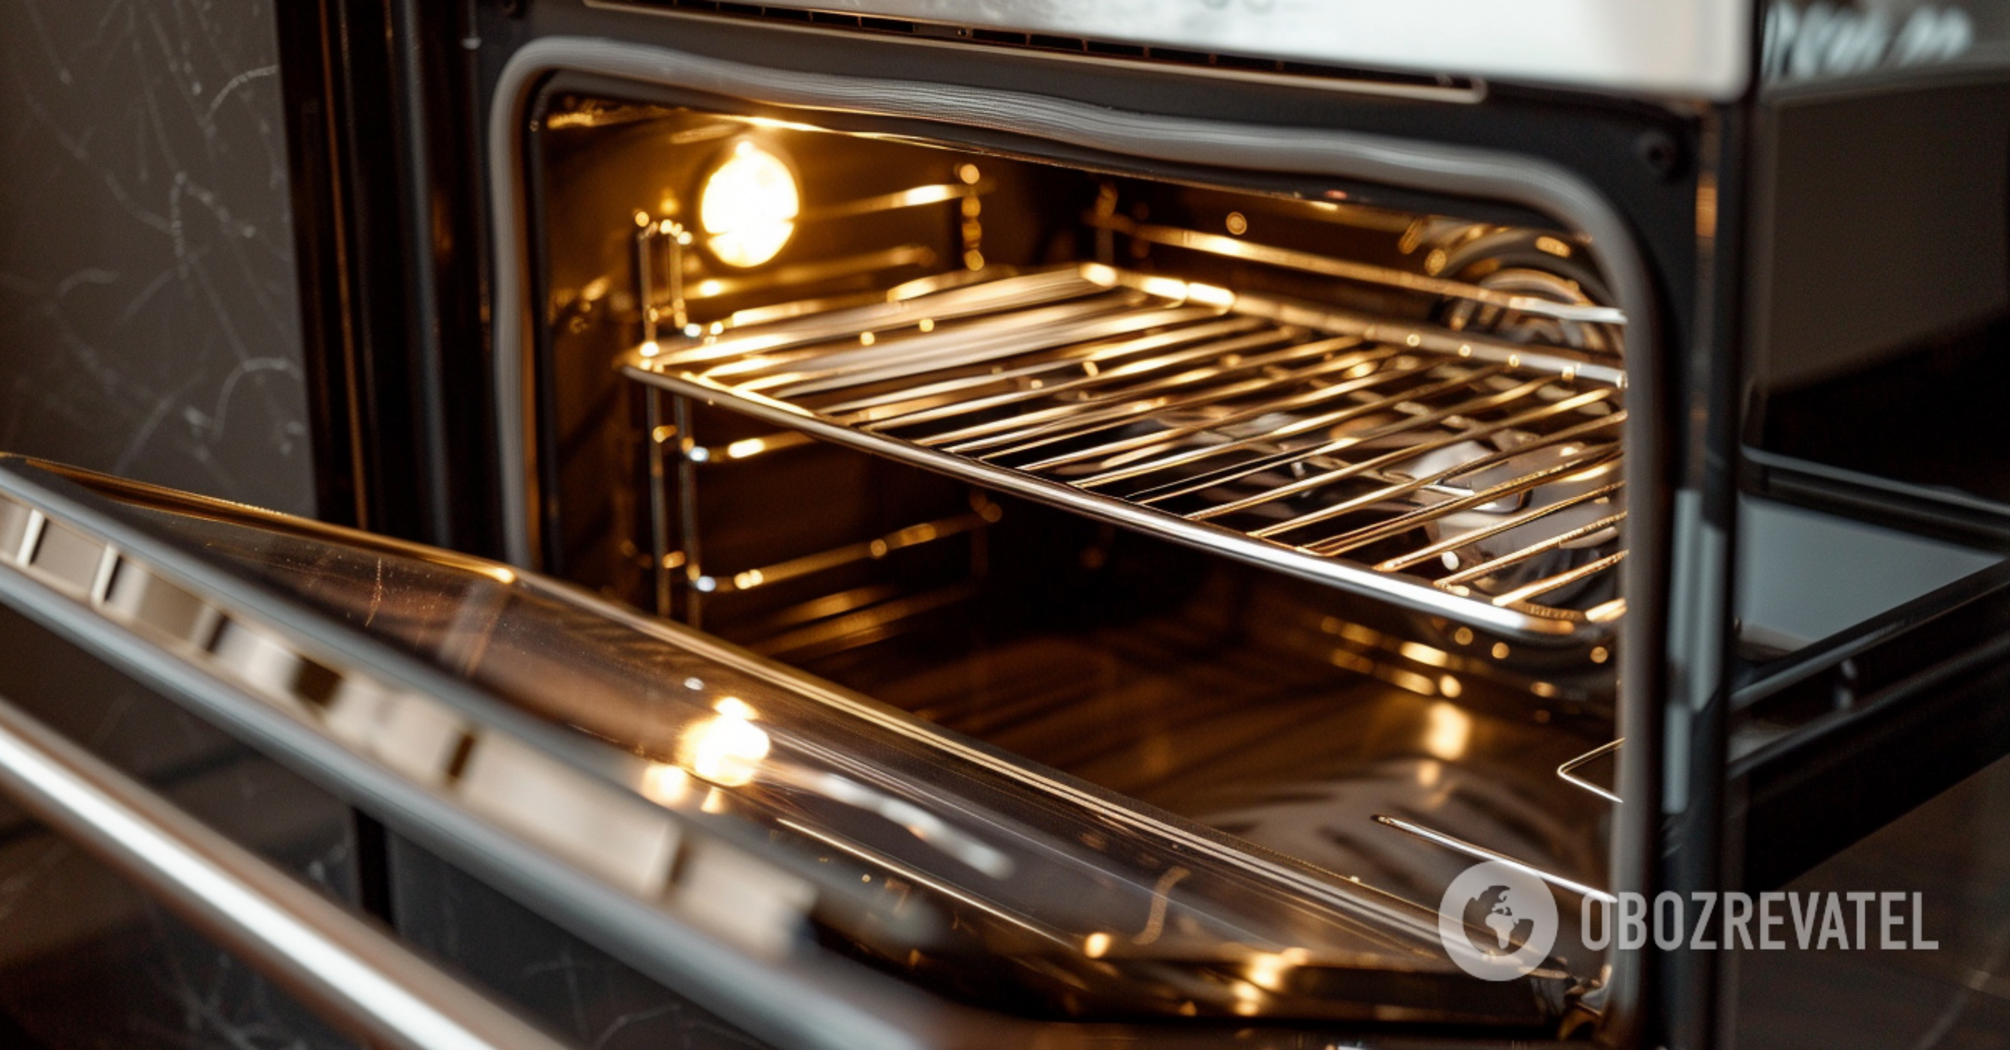 How to clean the oven from sticky dirt: an easy way